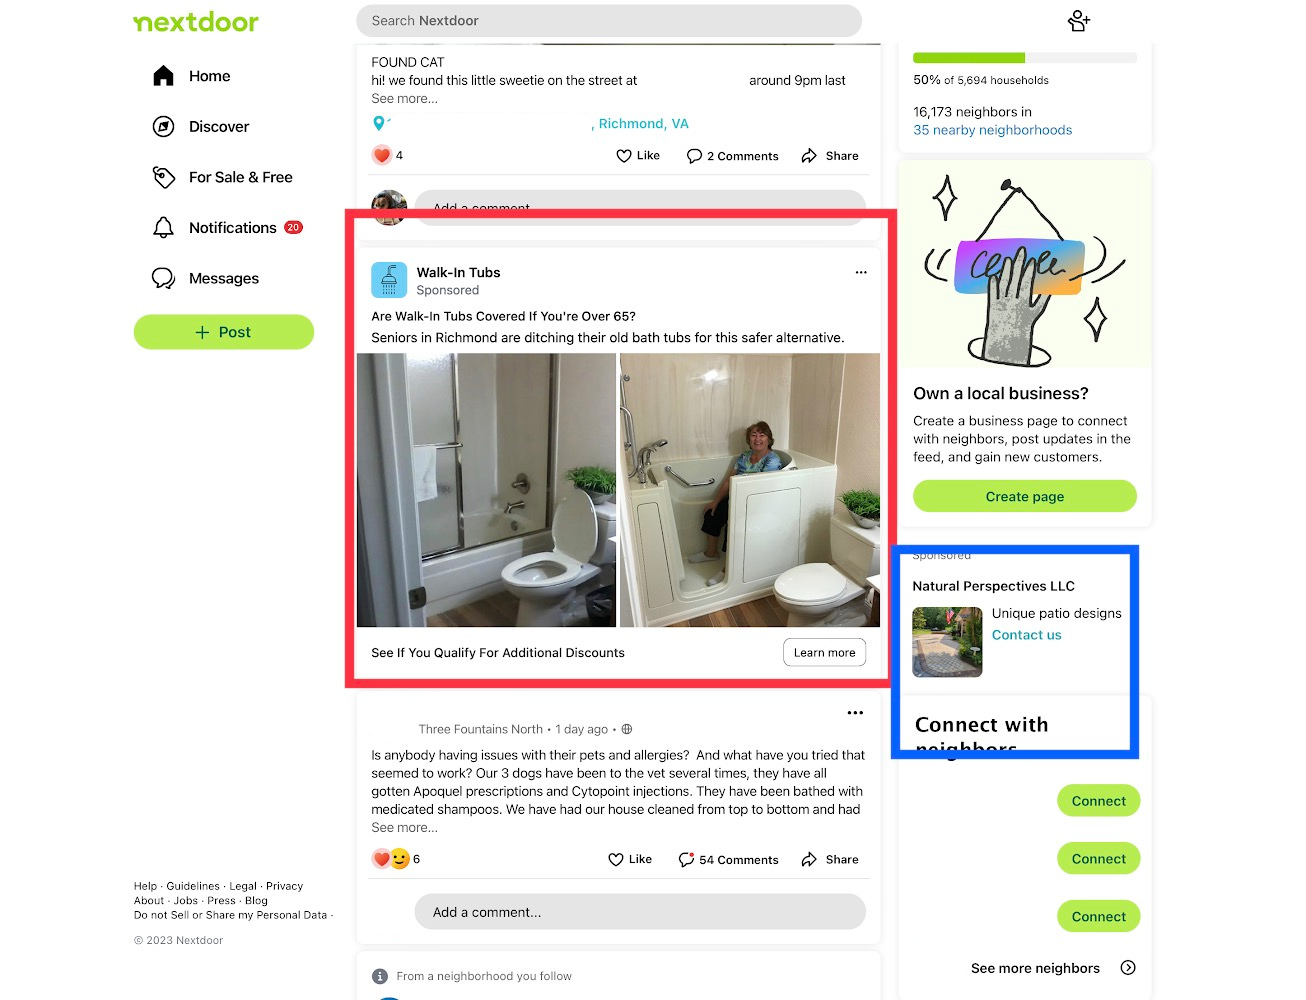 An example of paid social ads on a Nextdoor feed.